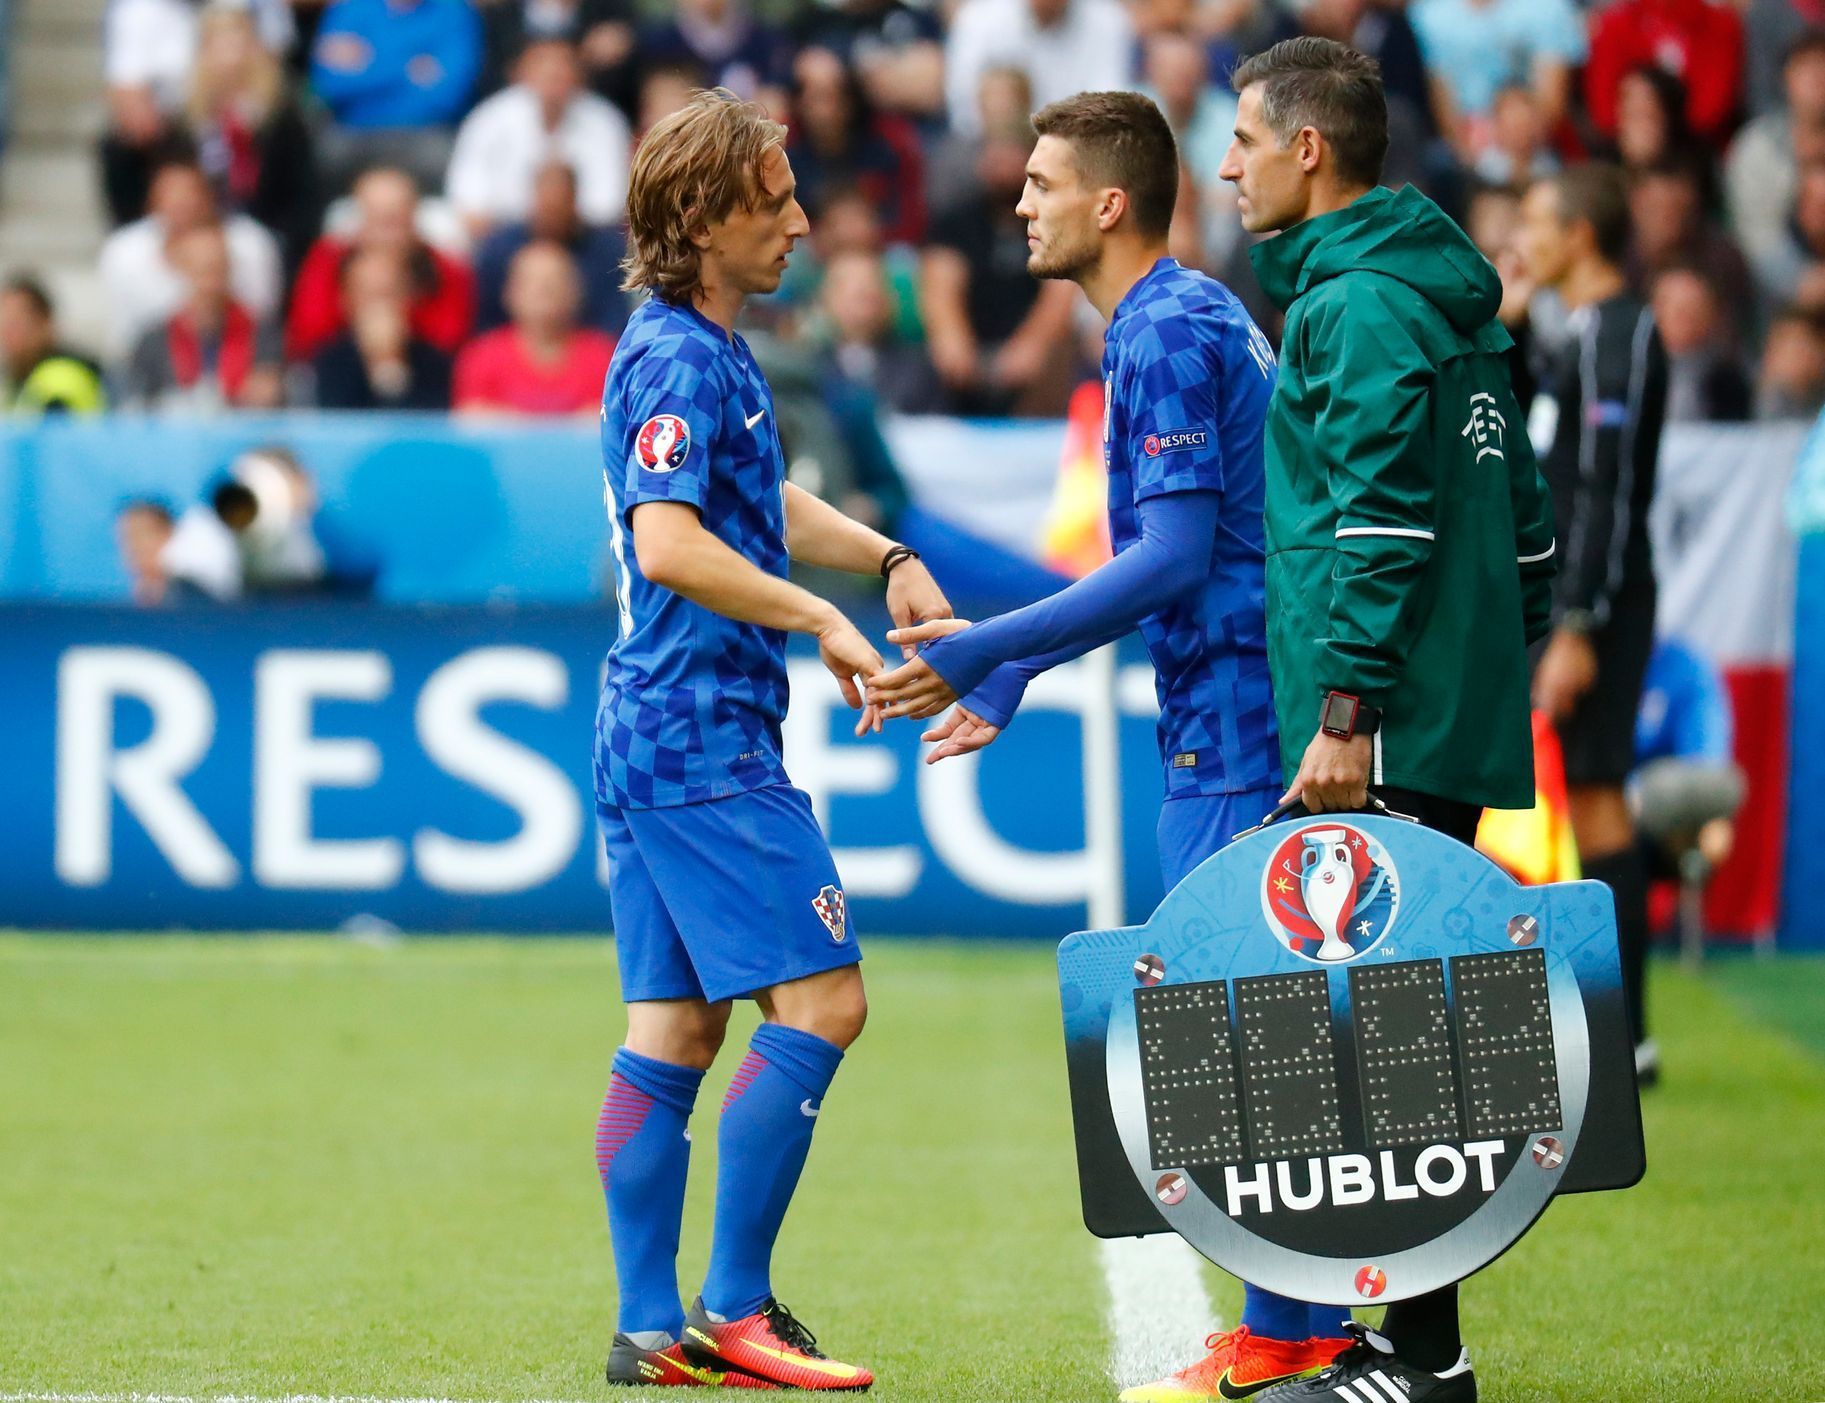 Croatia's Luka Modric is substituted by Mateo Kovacic